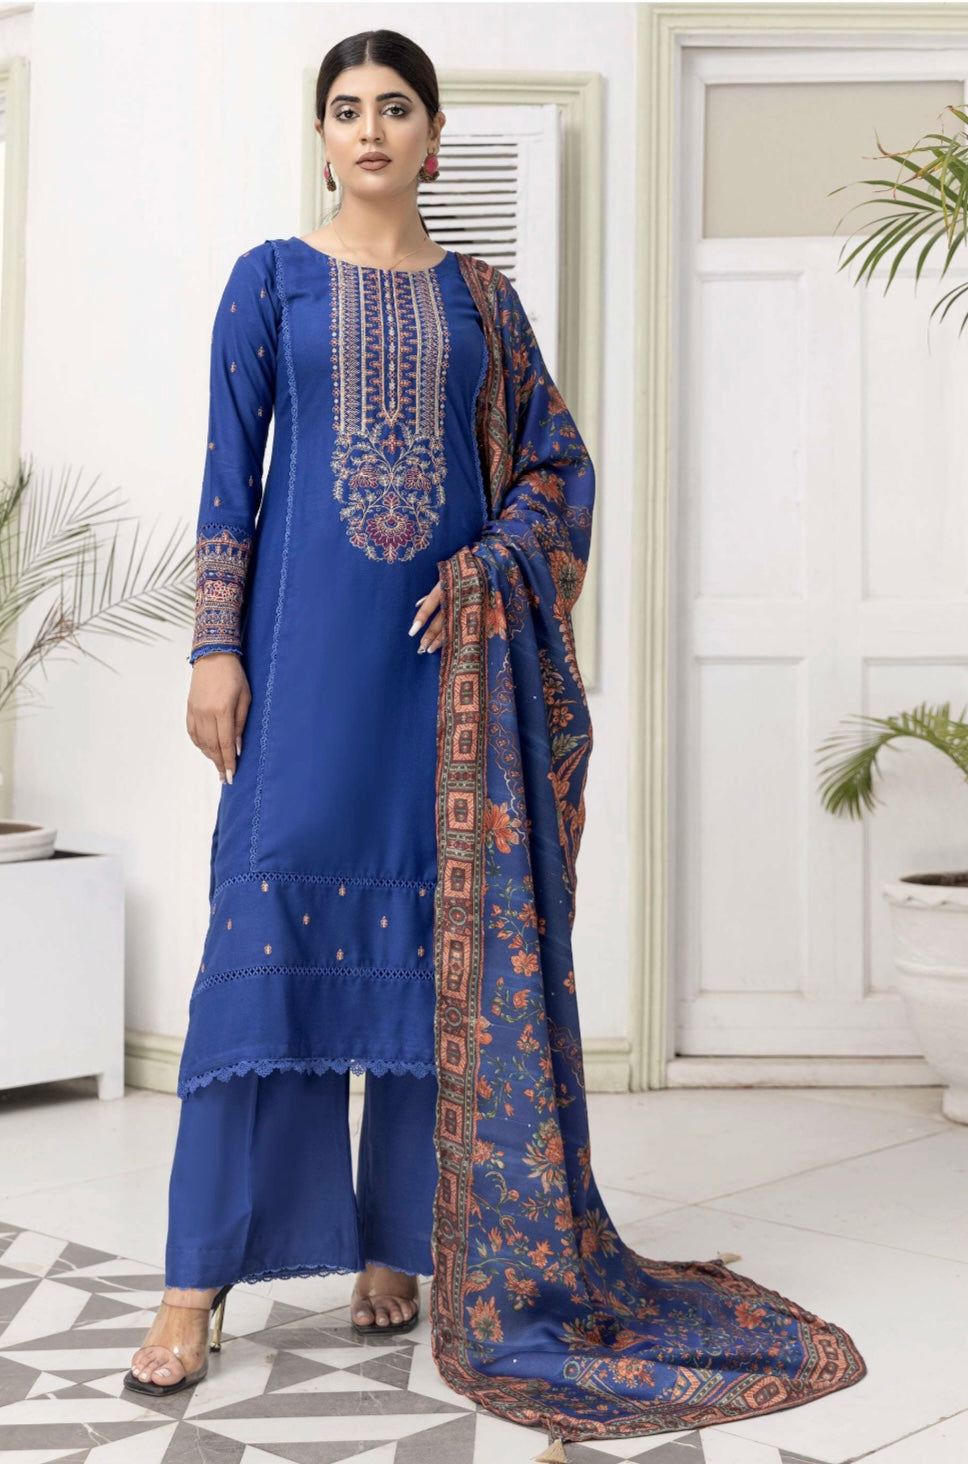 SIMRANS MAHI Dhanak Embroidered 3 Piece Winter Outfit With Shawl MSH02